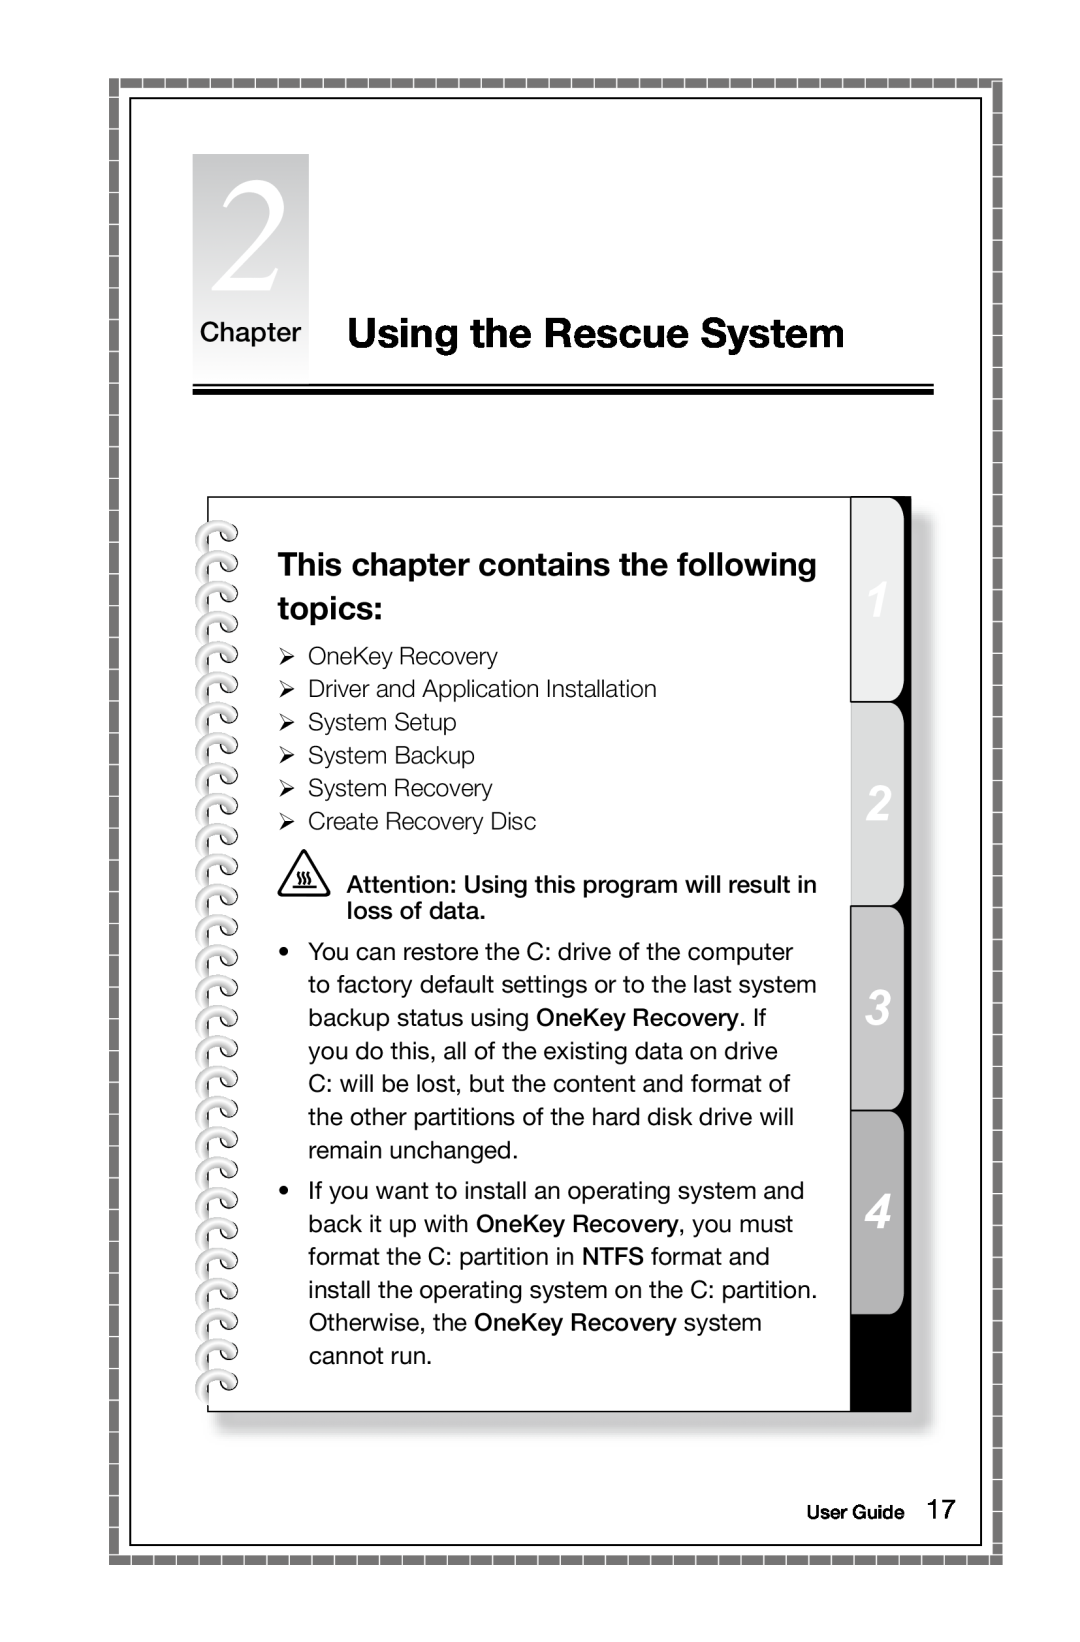 Lenovo 10066/7747, 10073/1169, 10067/7748 manual Chapter Using the Rescue System, This chapter contains the following topics 